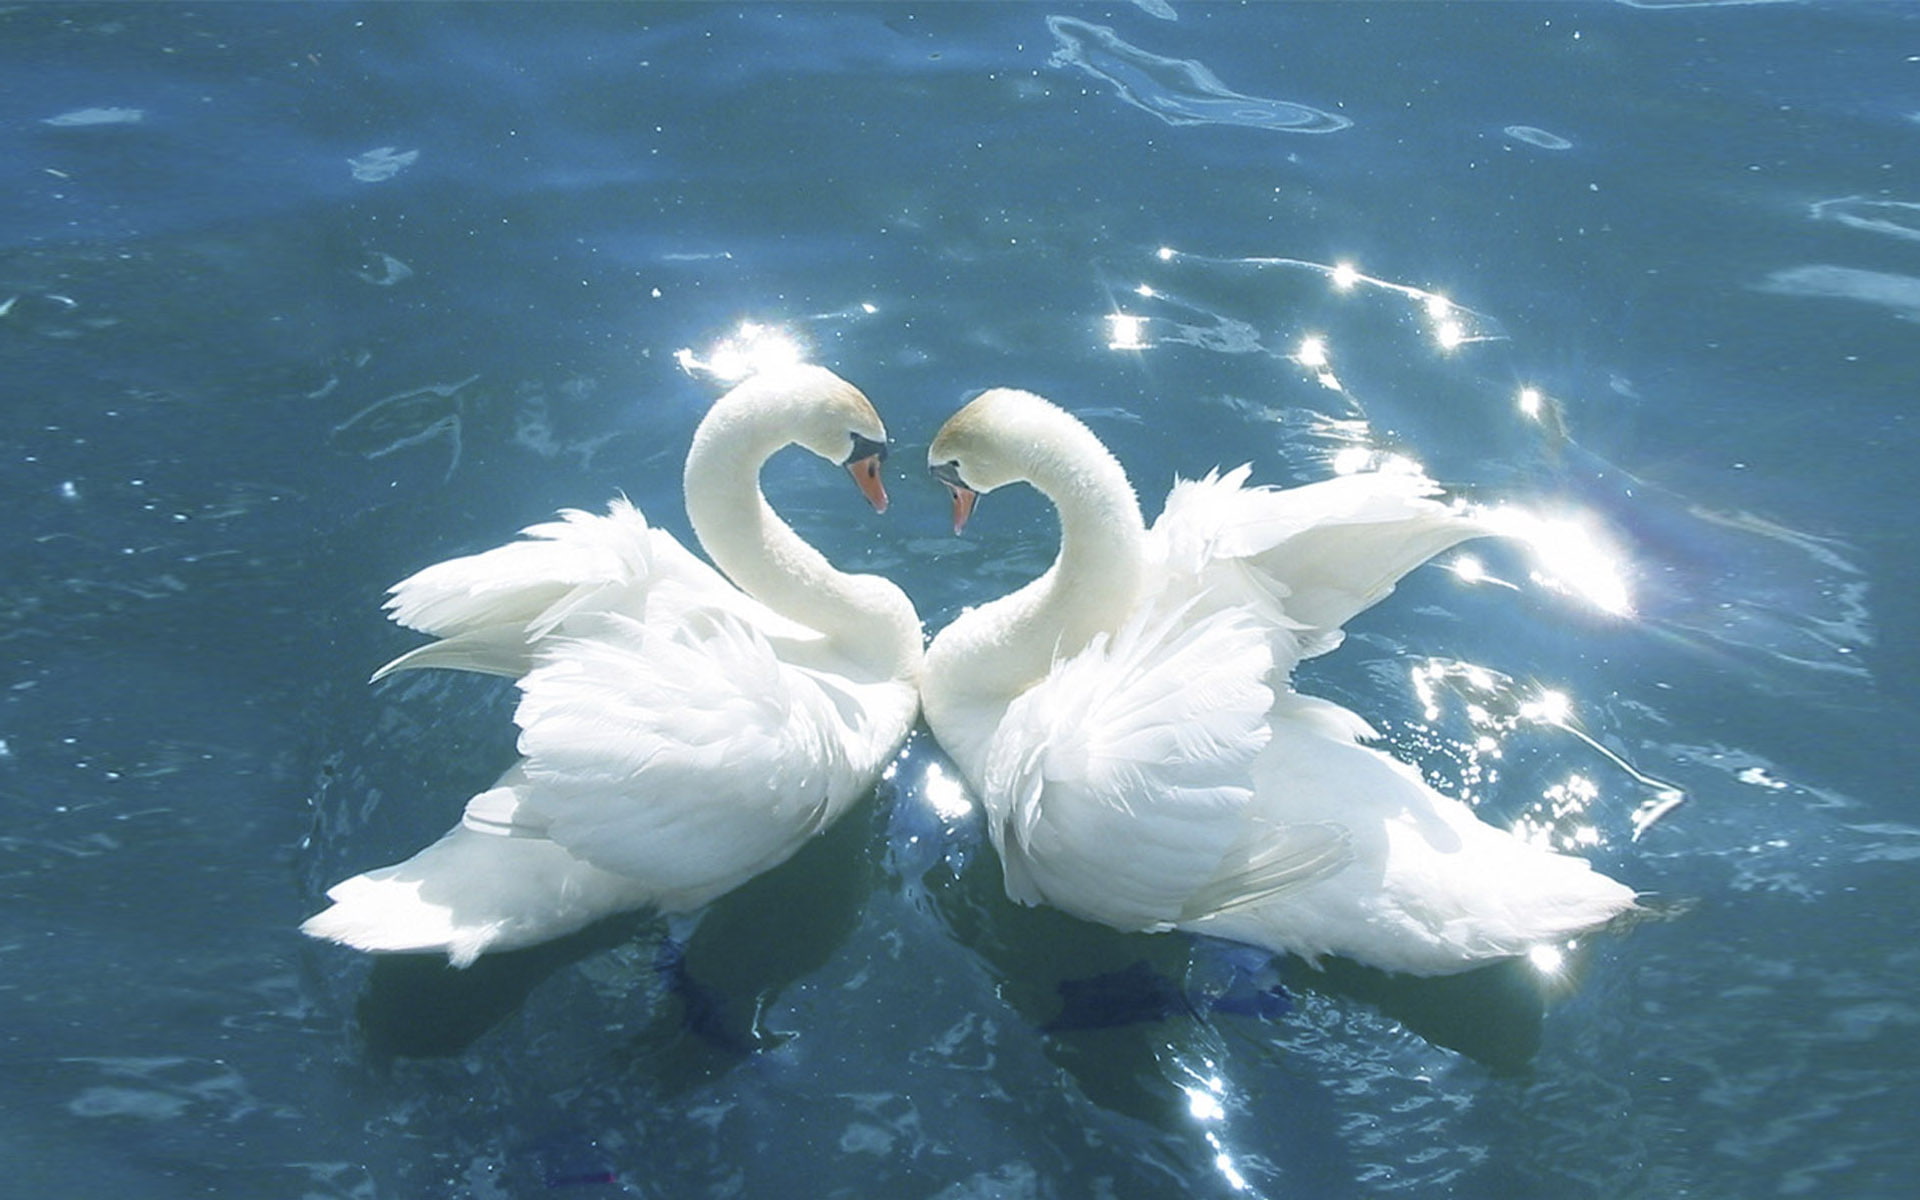 Swans Love Between Birds Blue Water Hd Wallpapers For Mobile Phones And Laptops